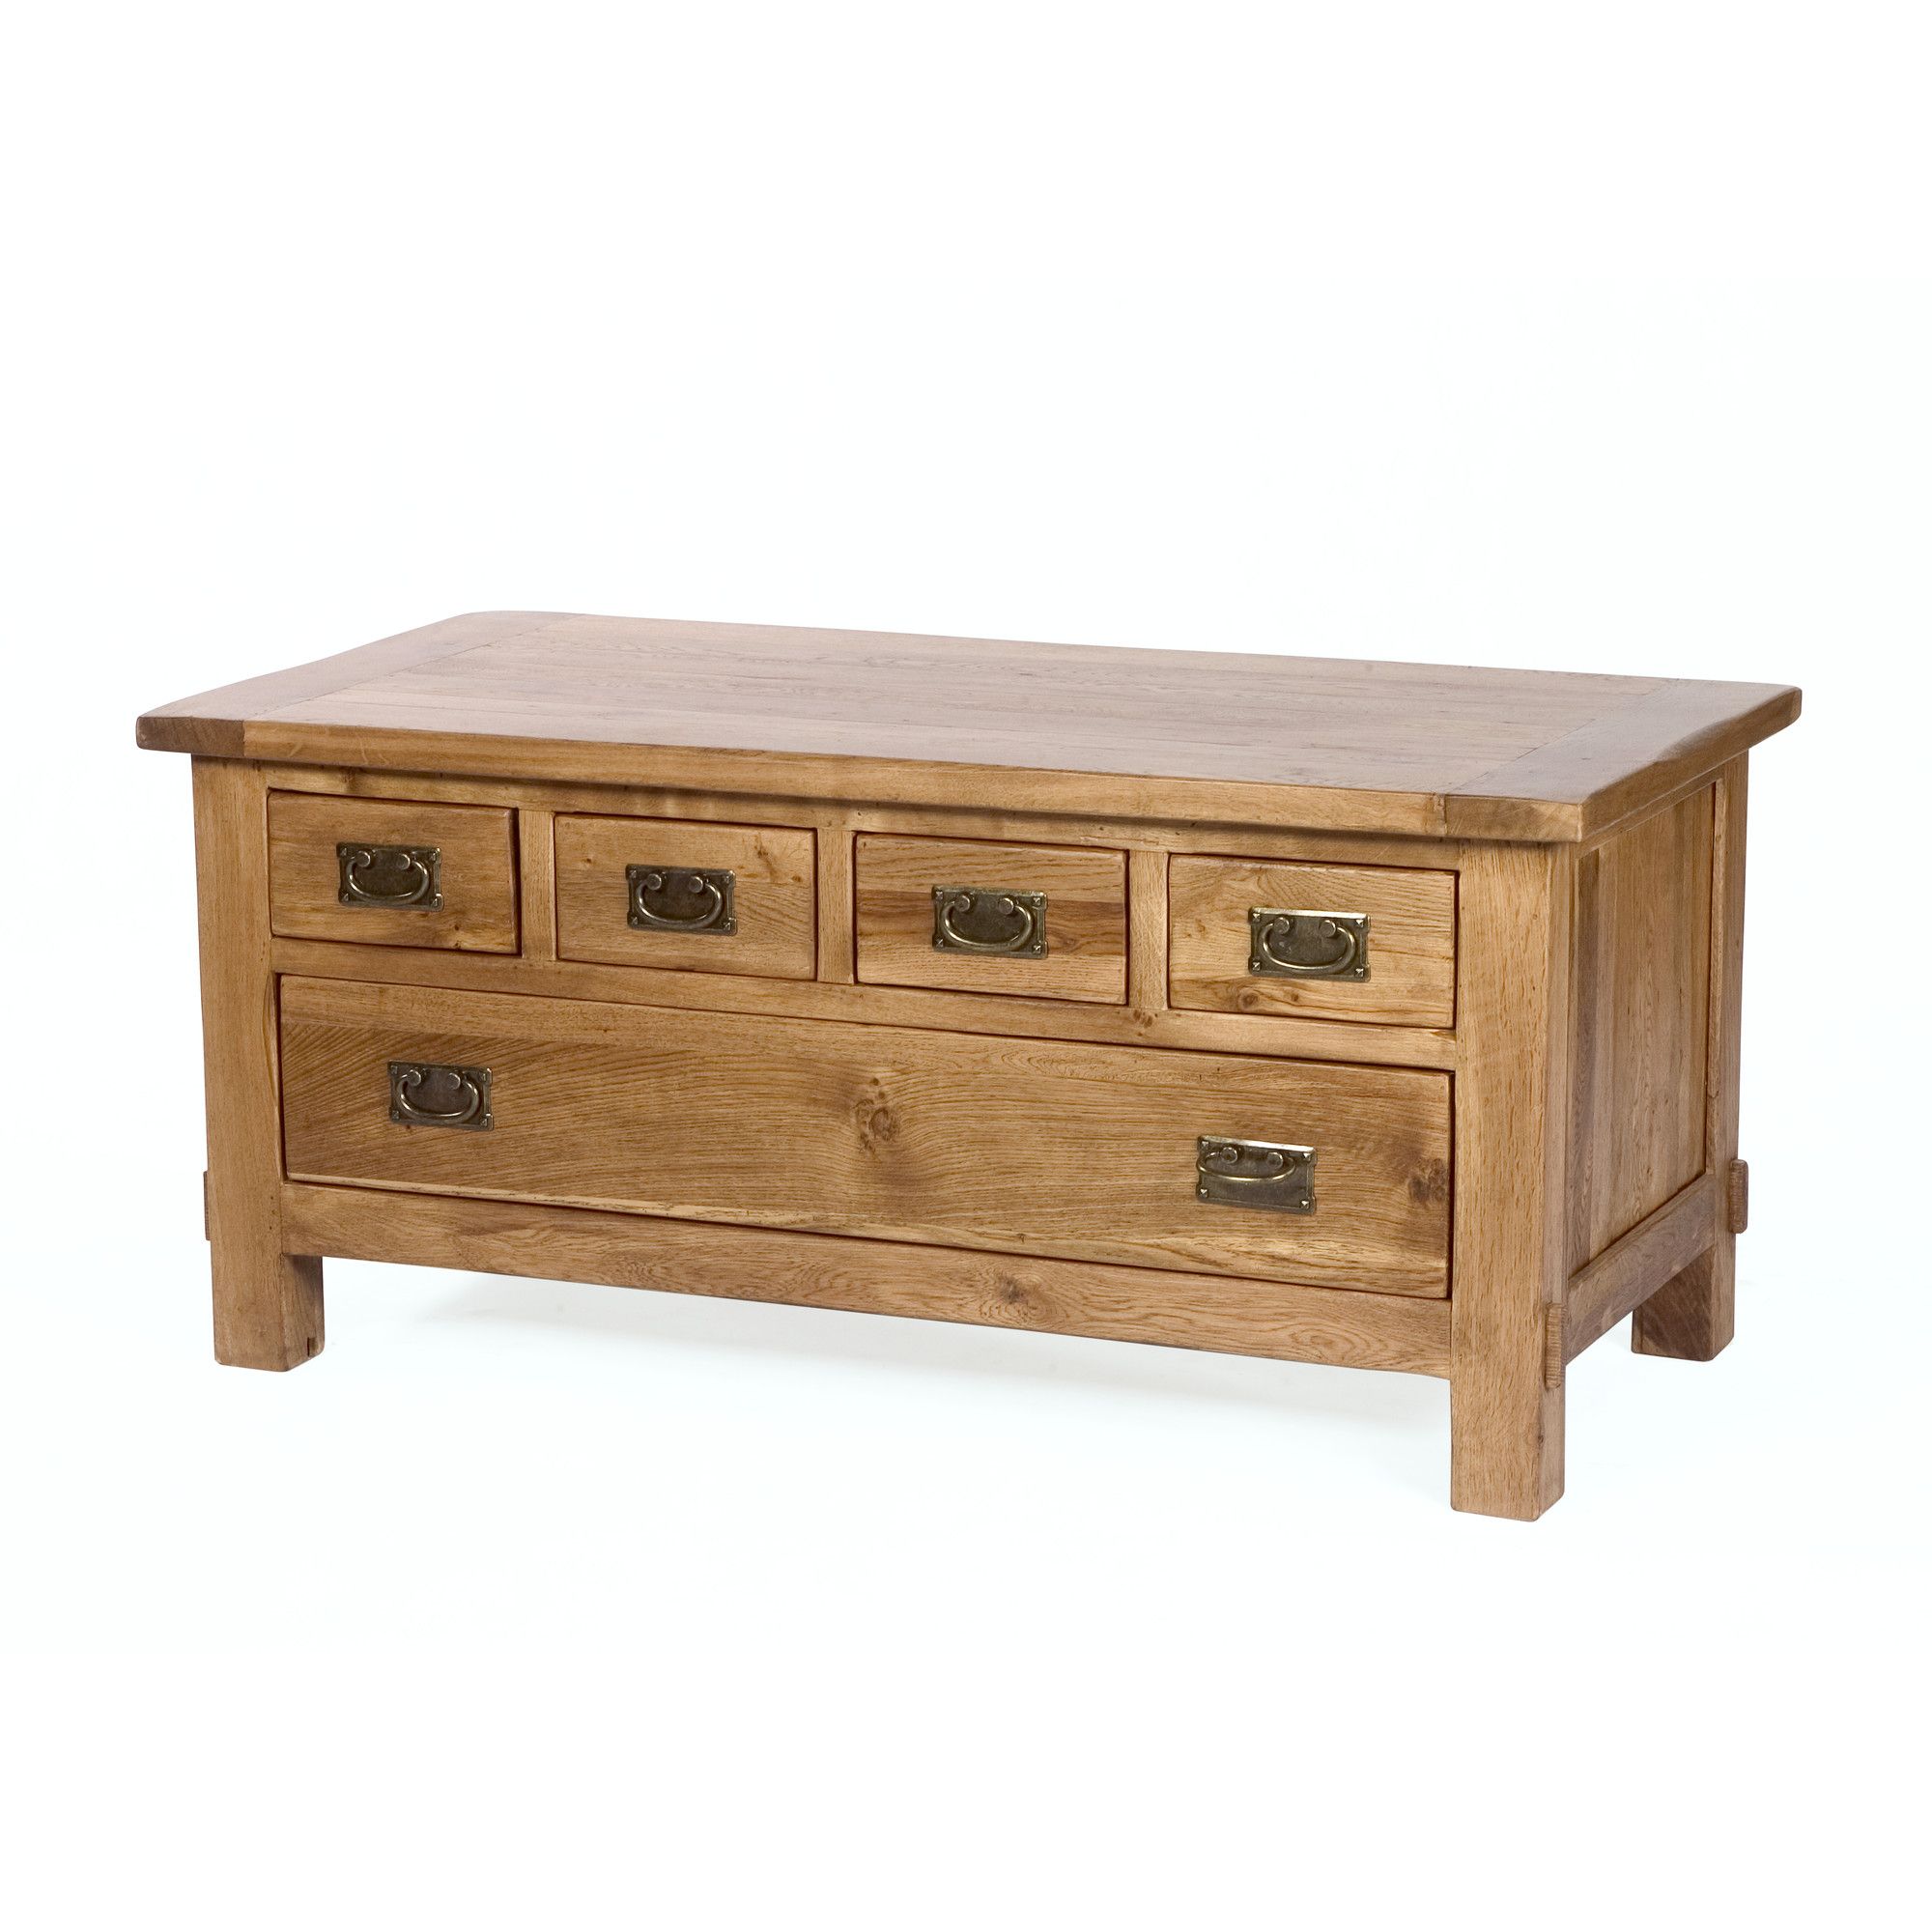 Wiseaction Riviera Coffee Table with Five Drawer at Tesco Direct